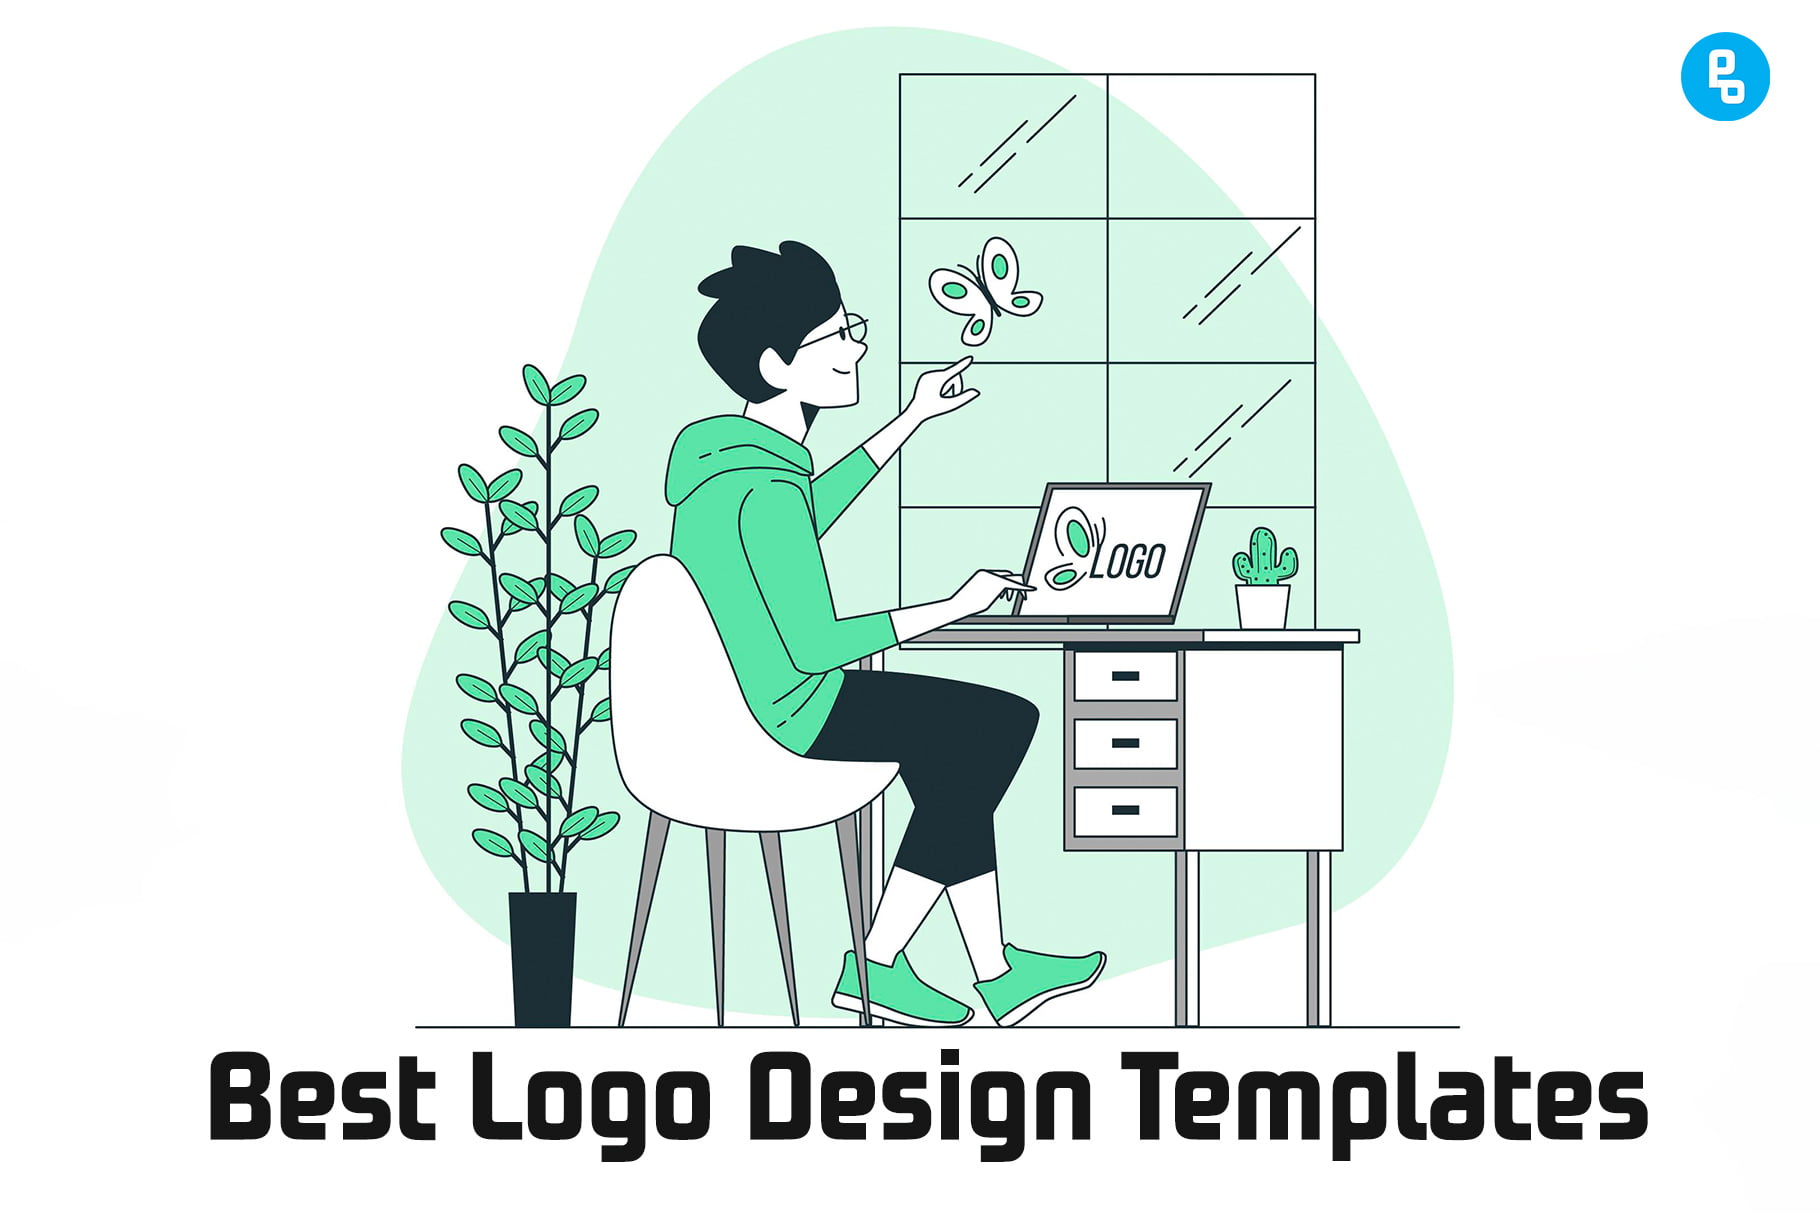 we'll just take a quick look at a few new logo templates that can help you build a professional brand. Each of them has its own flavor and style which will definitely attract your client's attention.